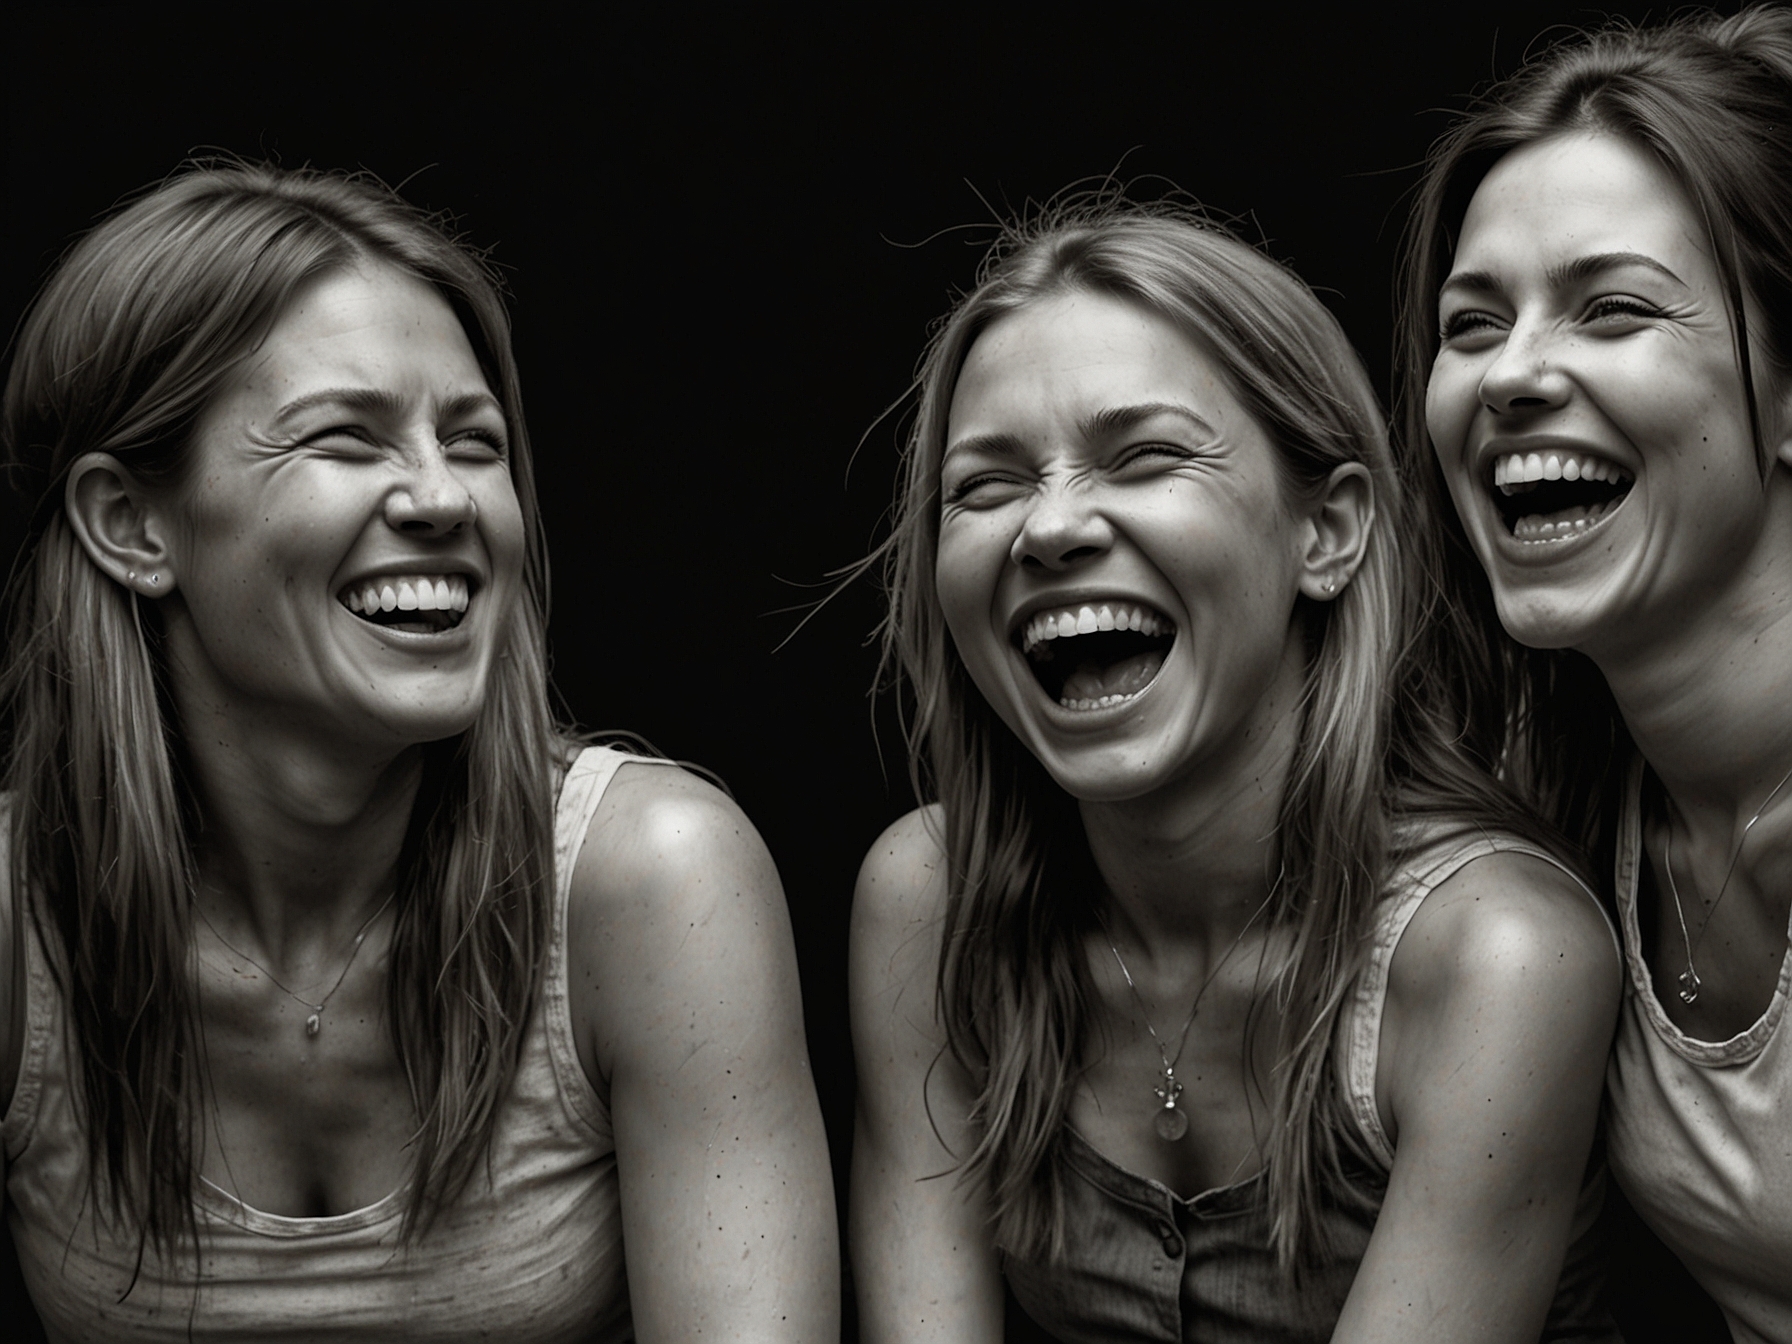 A close-up of the women laughing, showcasing their strong friendship and defiance against trolls.